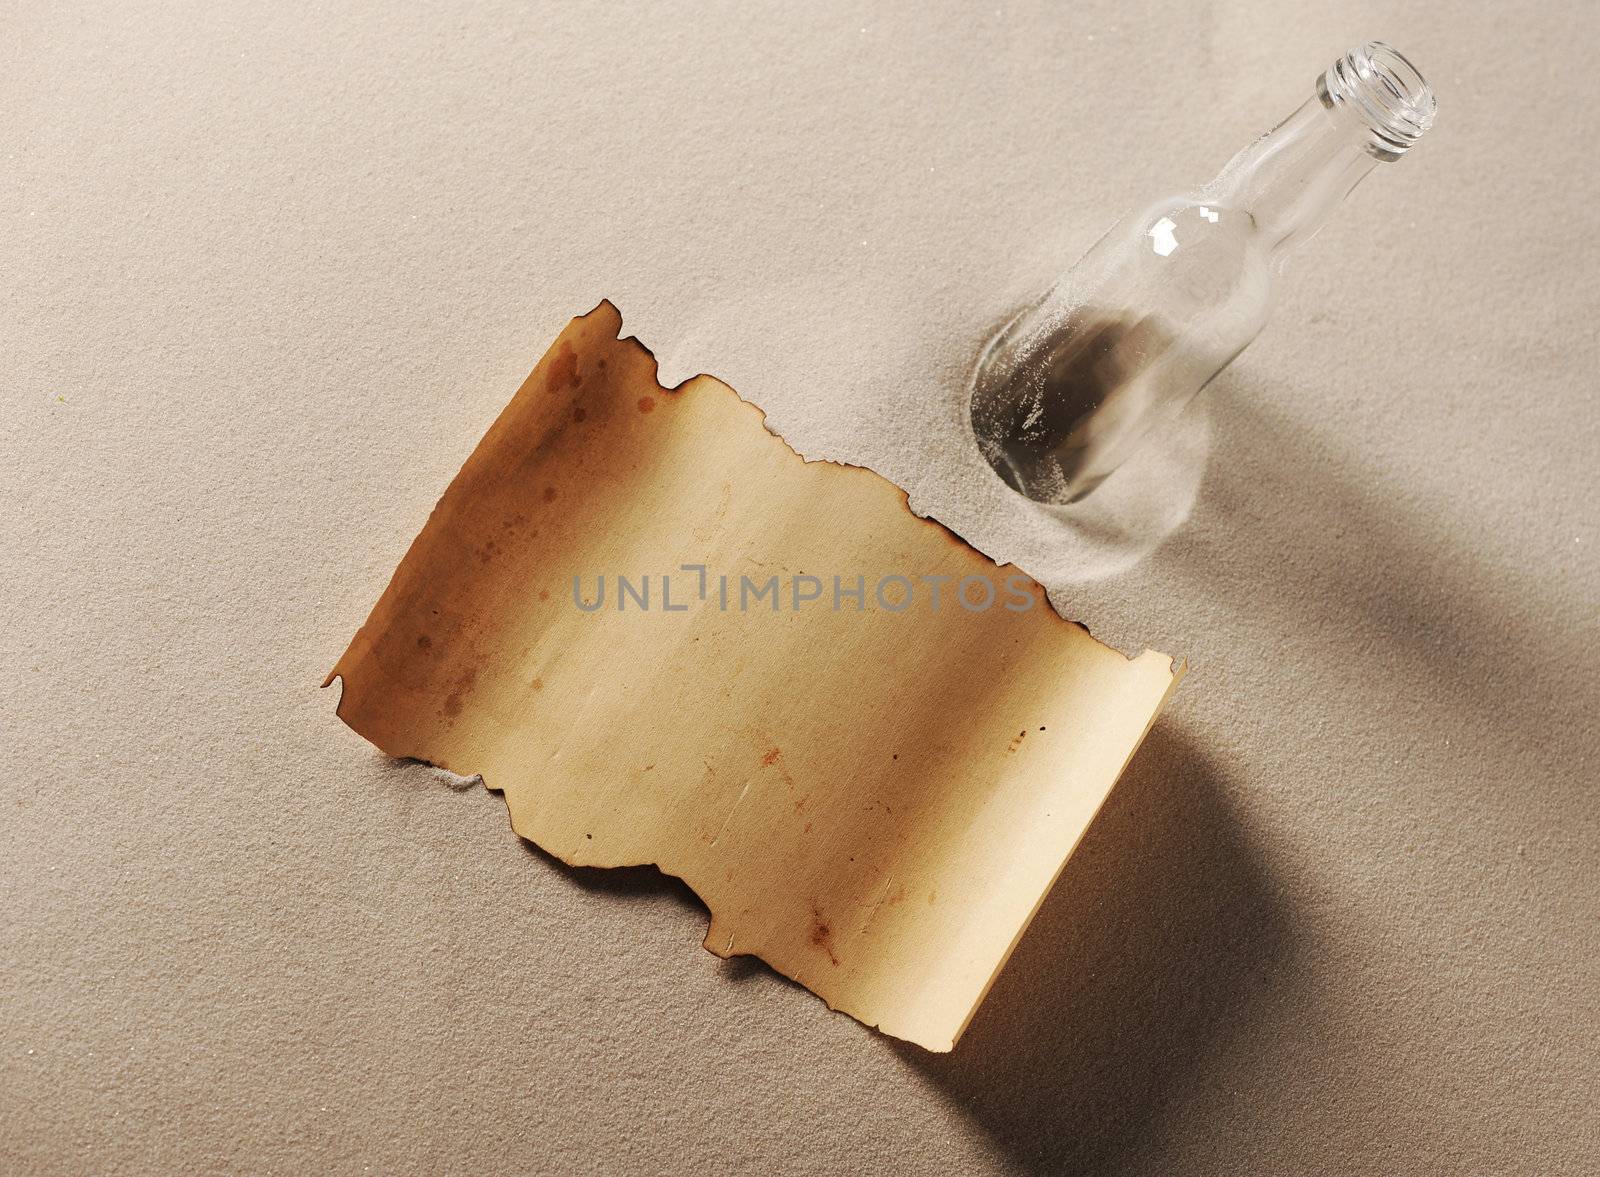 message in a bottle. The paper is blank to put whatever message  by stokkete